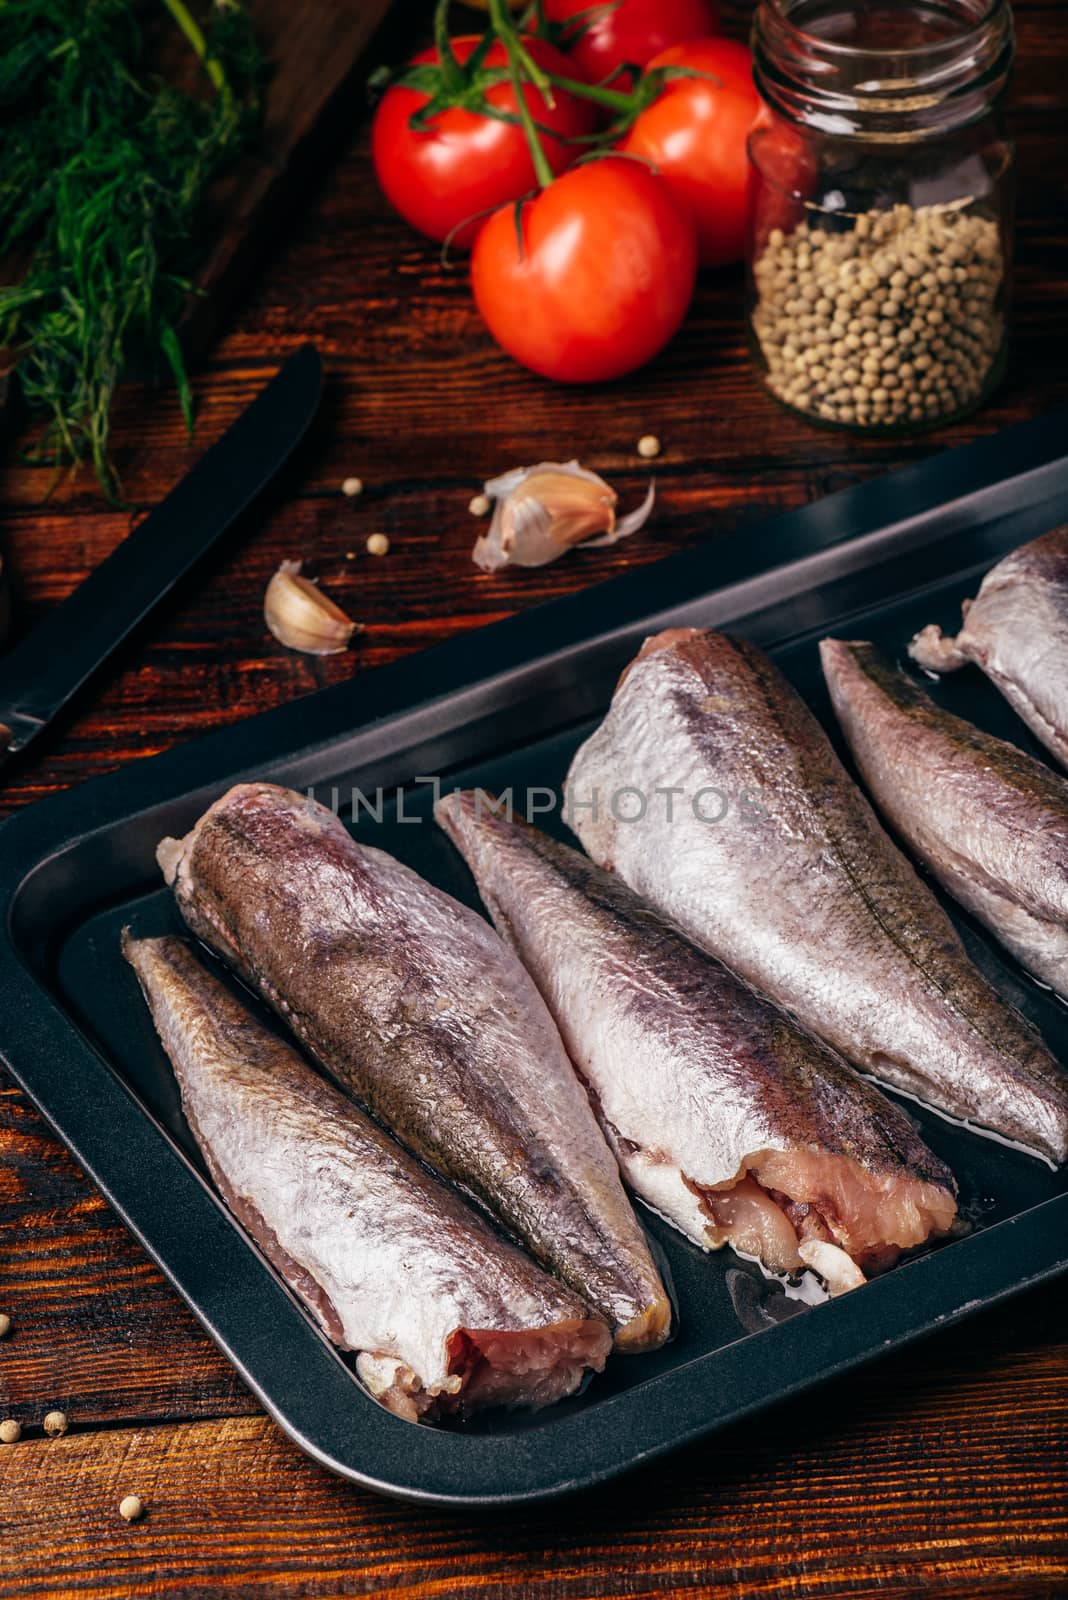 Hake carcasses on baking sheet with vegetables and spices